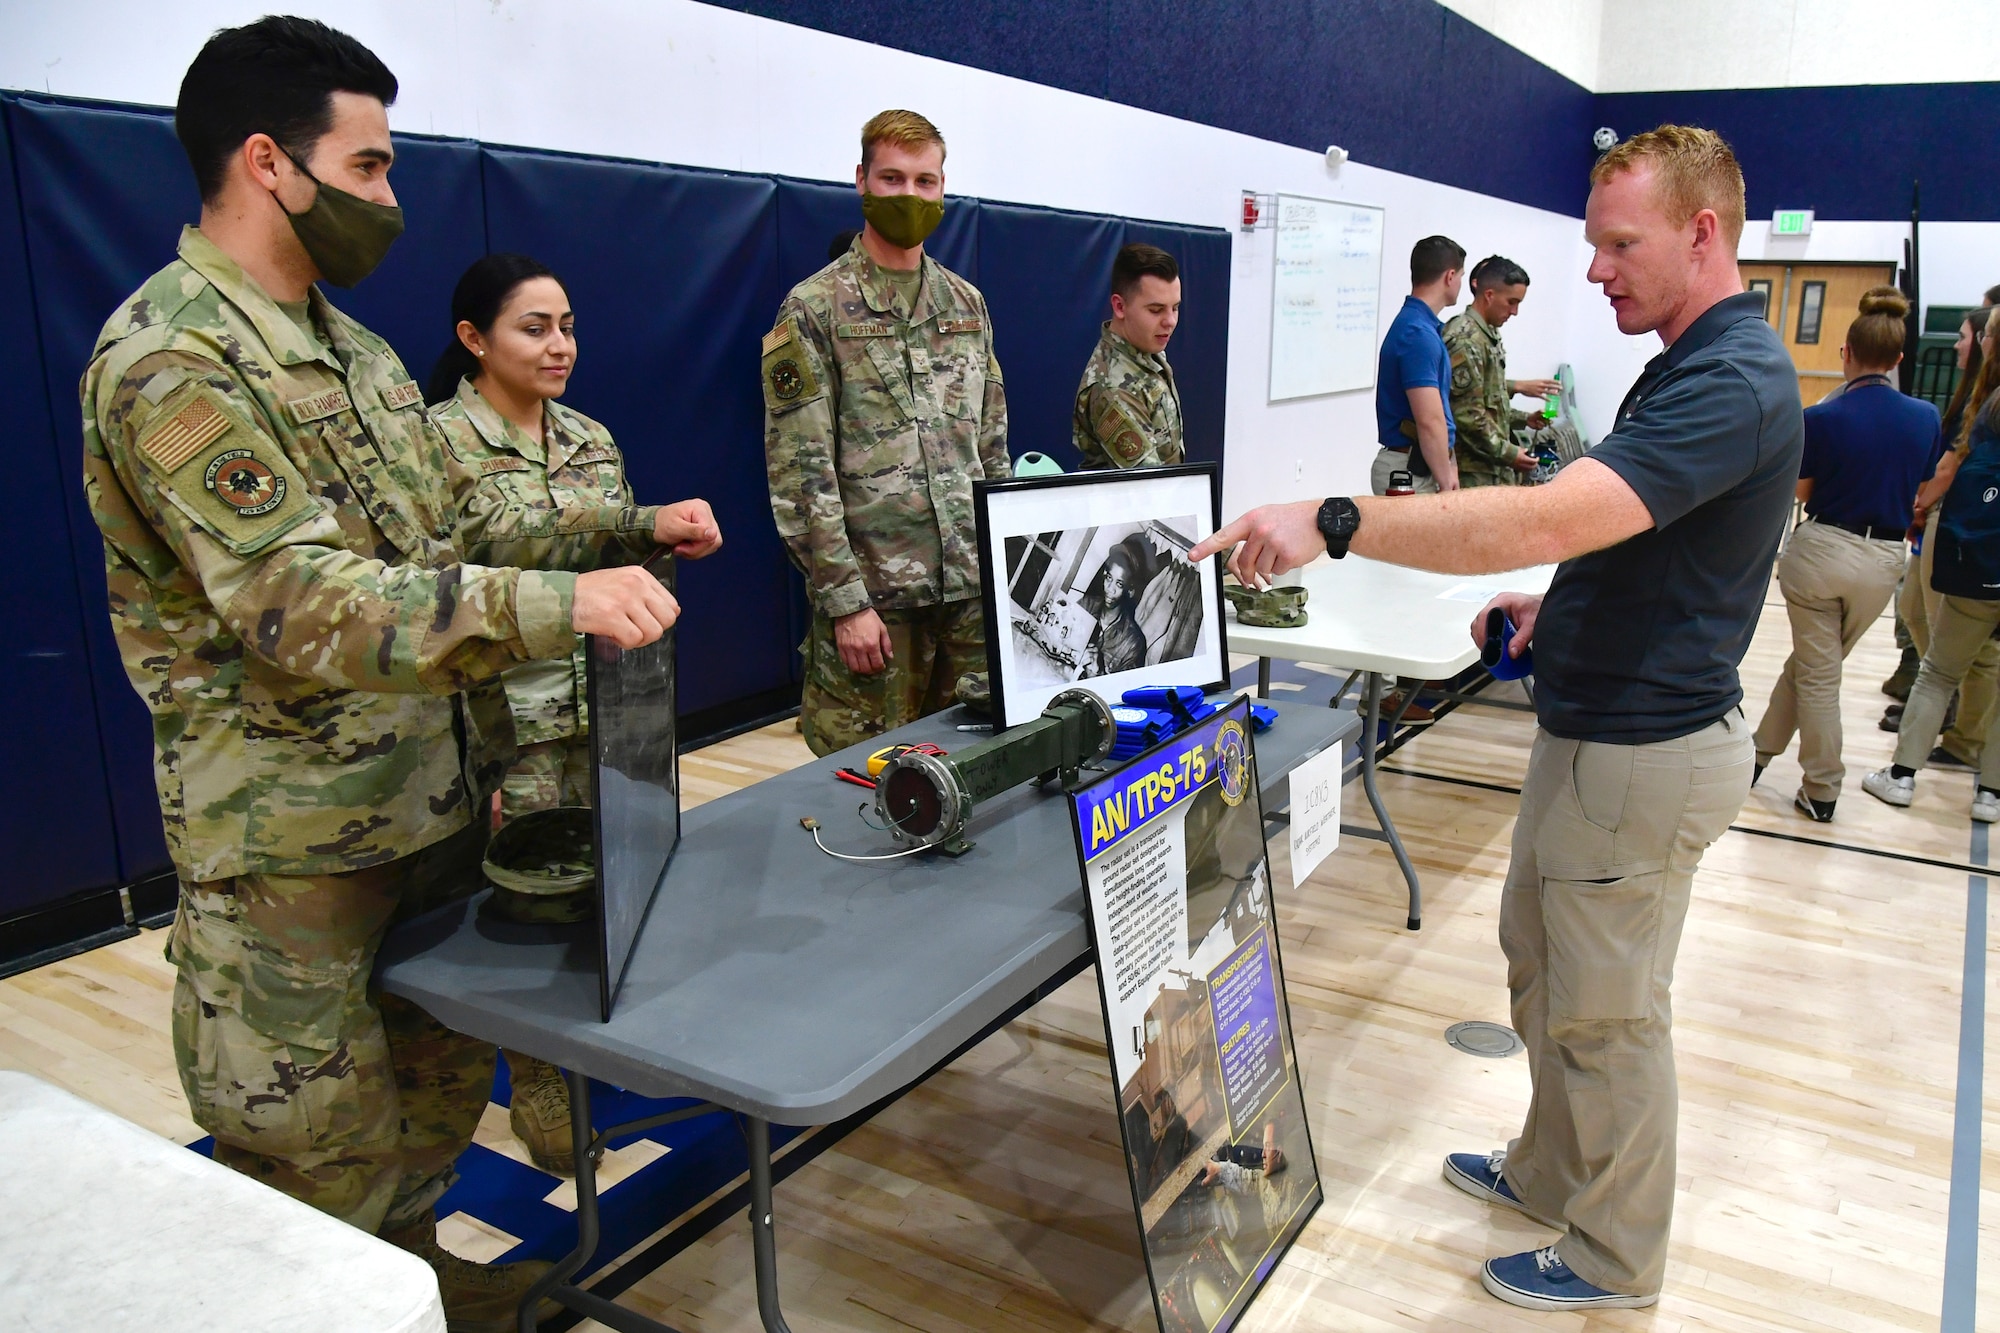 Airman First Class Gonzalez Ramirez Omar, 729th Air Control Squadron, speaks with a student while participating in a job fair at the Utah Military Academy, May 25, 2021, in Riverdale Utah. Airmen from Hill Air Force Base recently hosted the event at the nearby charter high school to educate and inspire students, as well as promote interest in the possibility of future military careers. (U.S. Air Force photo by Todd Cromar)